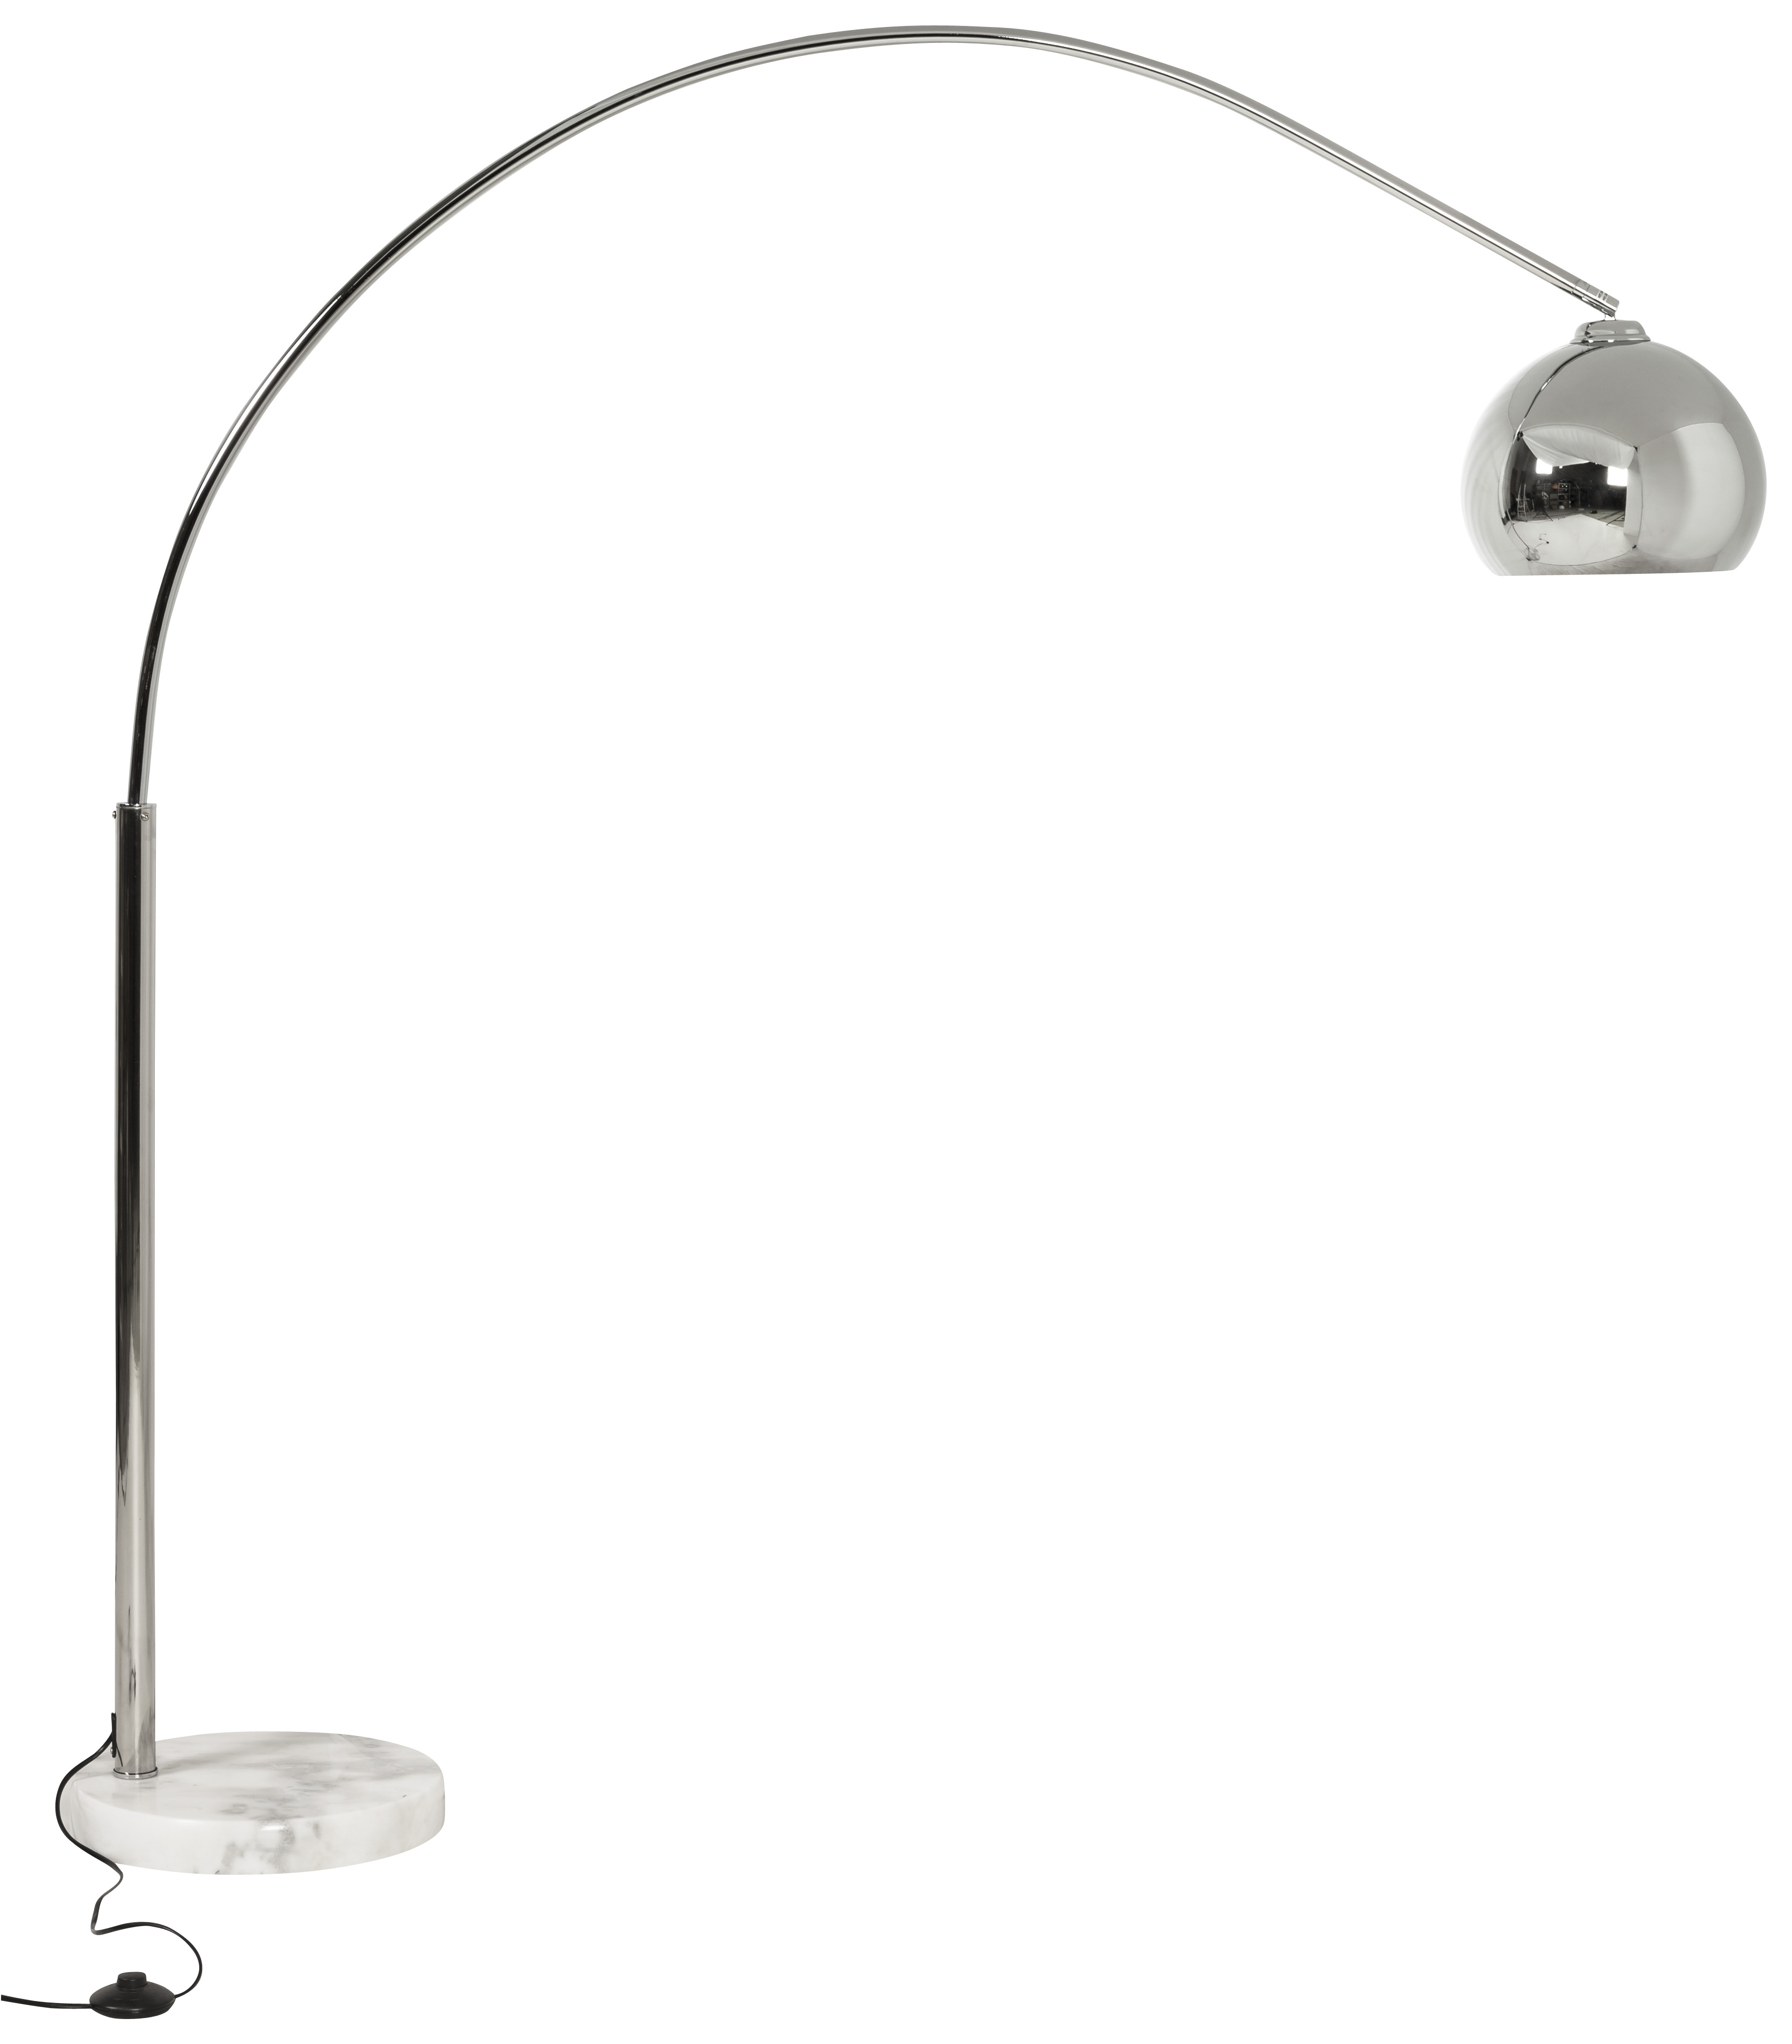 Amazing Floor Standing Reading Lamp Chrome Adjustable W O in dimensions 3589 X 4093